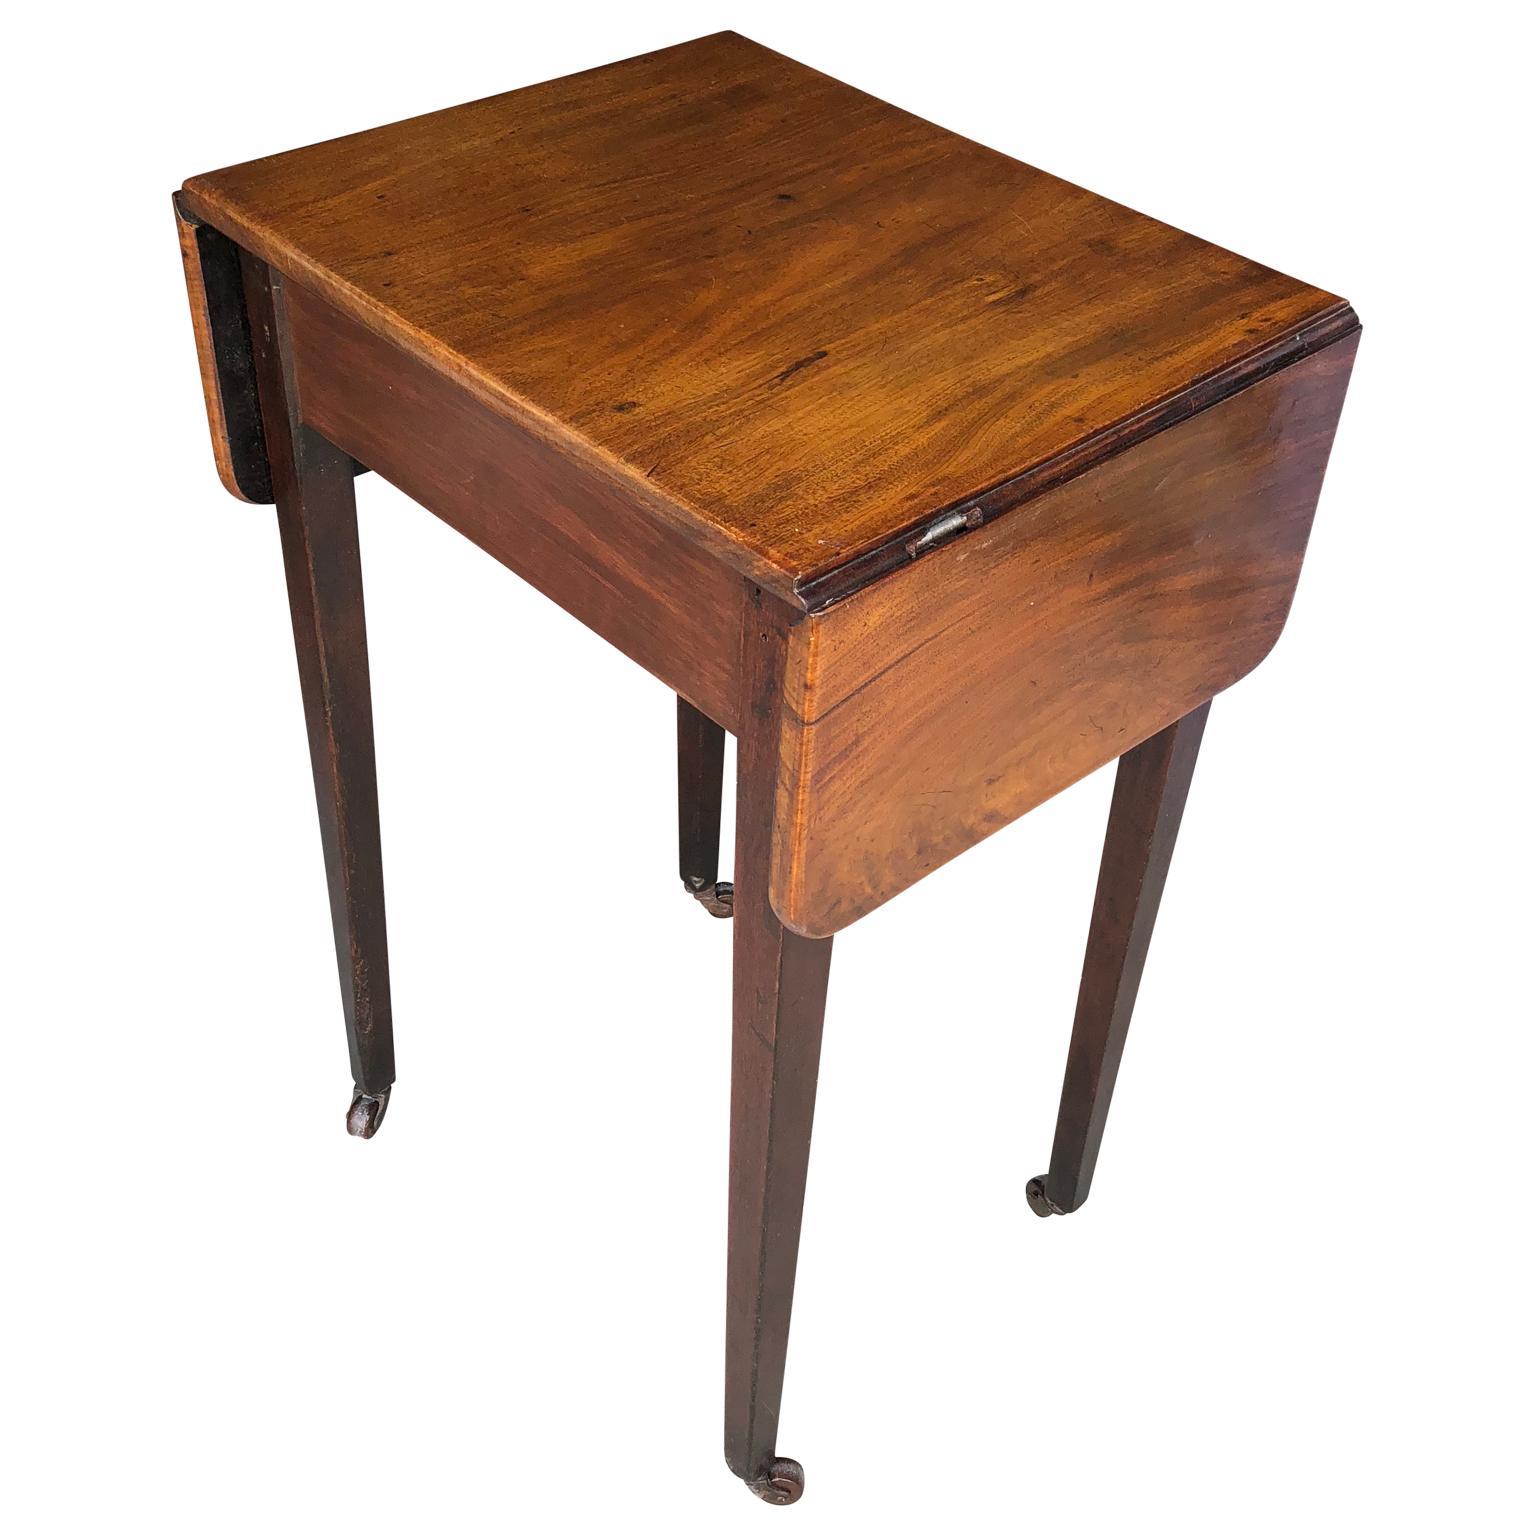 19th Century Classic Regency Style Drop-Leaf Table with Lion-Head Hardware